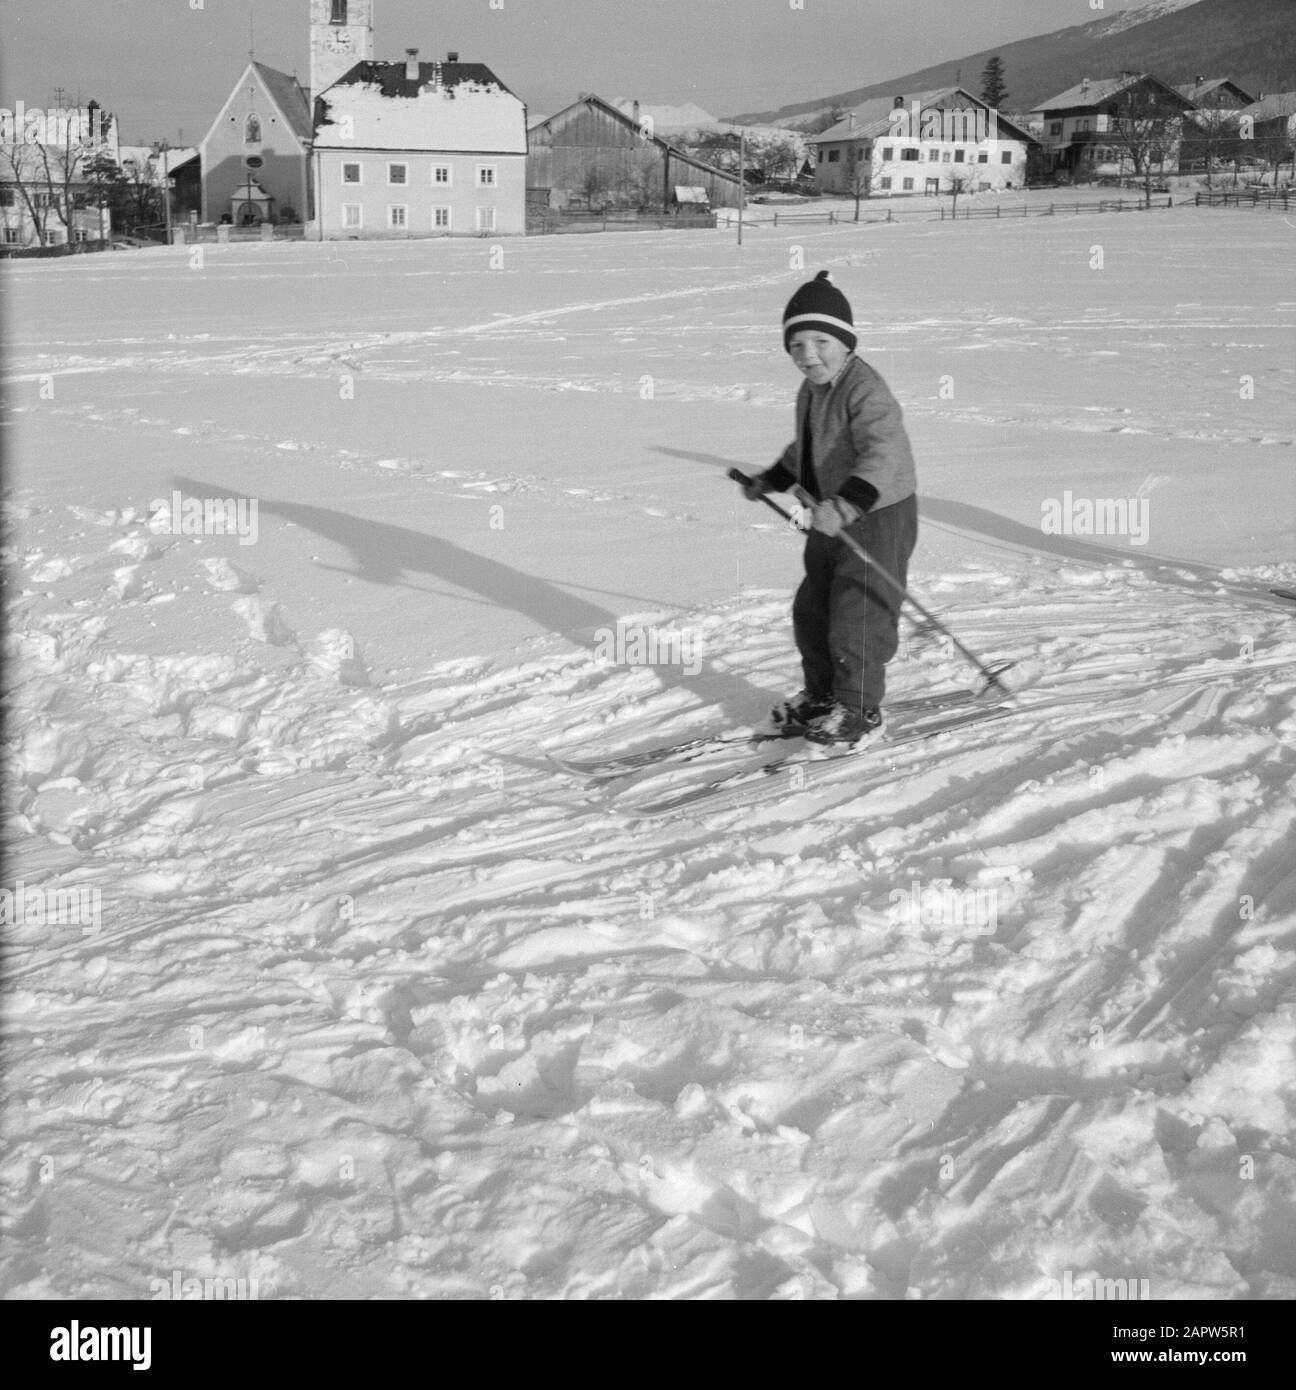 Winter in Tyrol  Child with skis in the snow with in the background Sistrans and the Karwendel Mountains Date: January 1960 Location: Austria, Sistrans, Tyrol Keywords: mountains, landscapes, cross-country skiing, skiing, snow, winter, winter sports Stock Photo